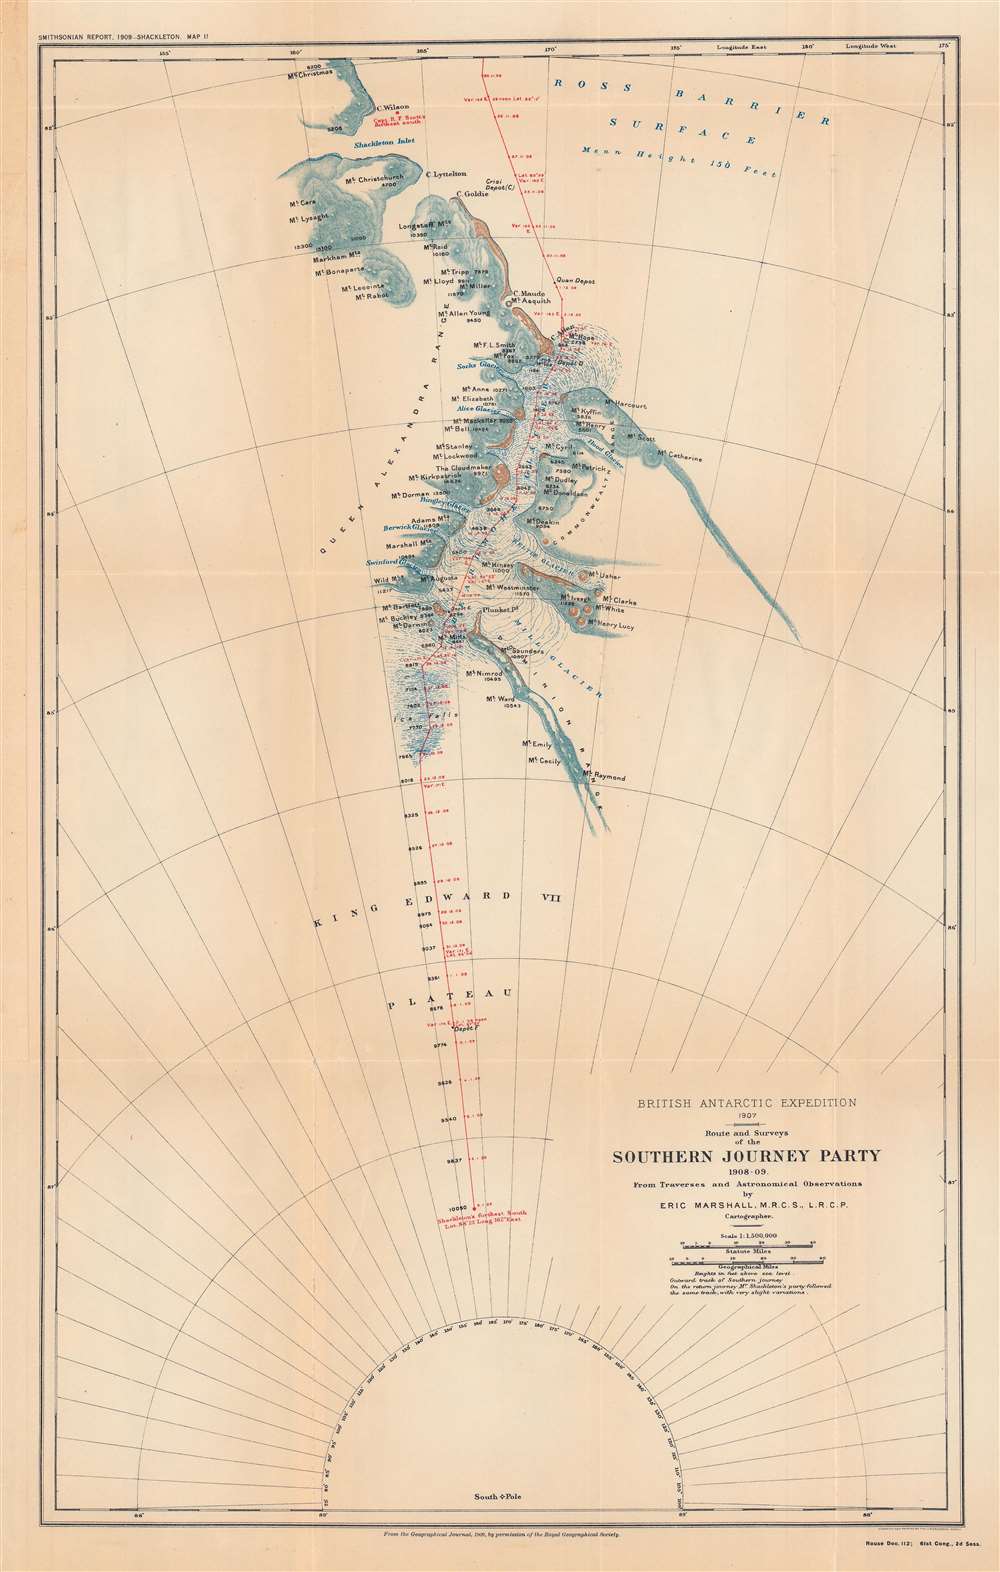 British Antarctic expedition, 1907: route and surveys of the Southern Journey Party, 1908-09. - Main View